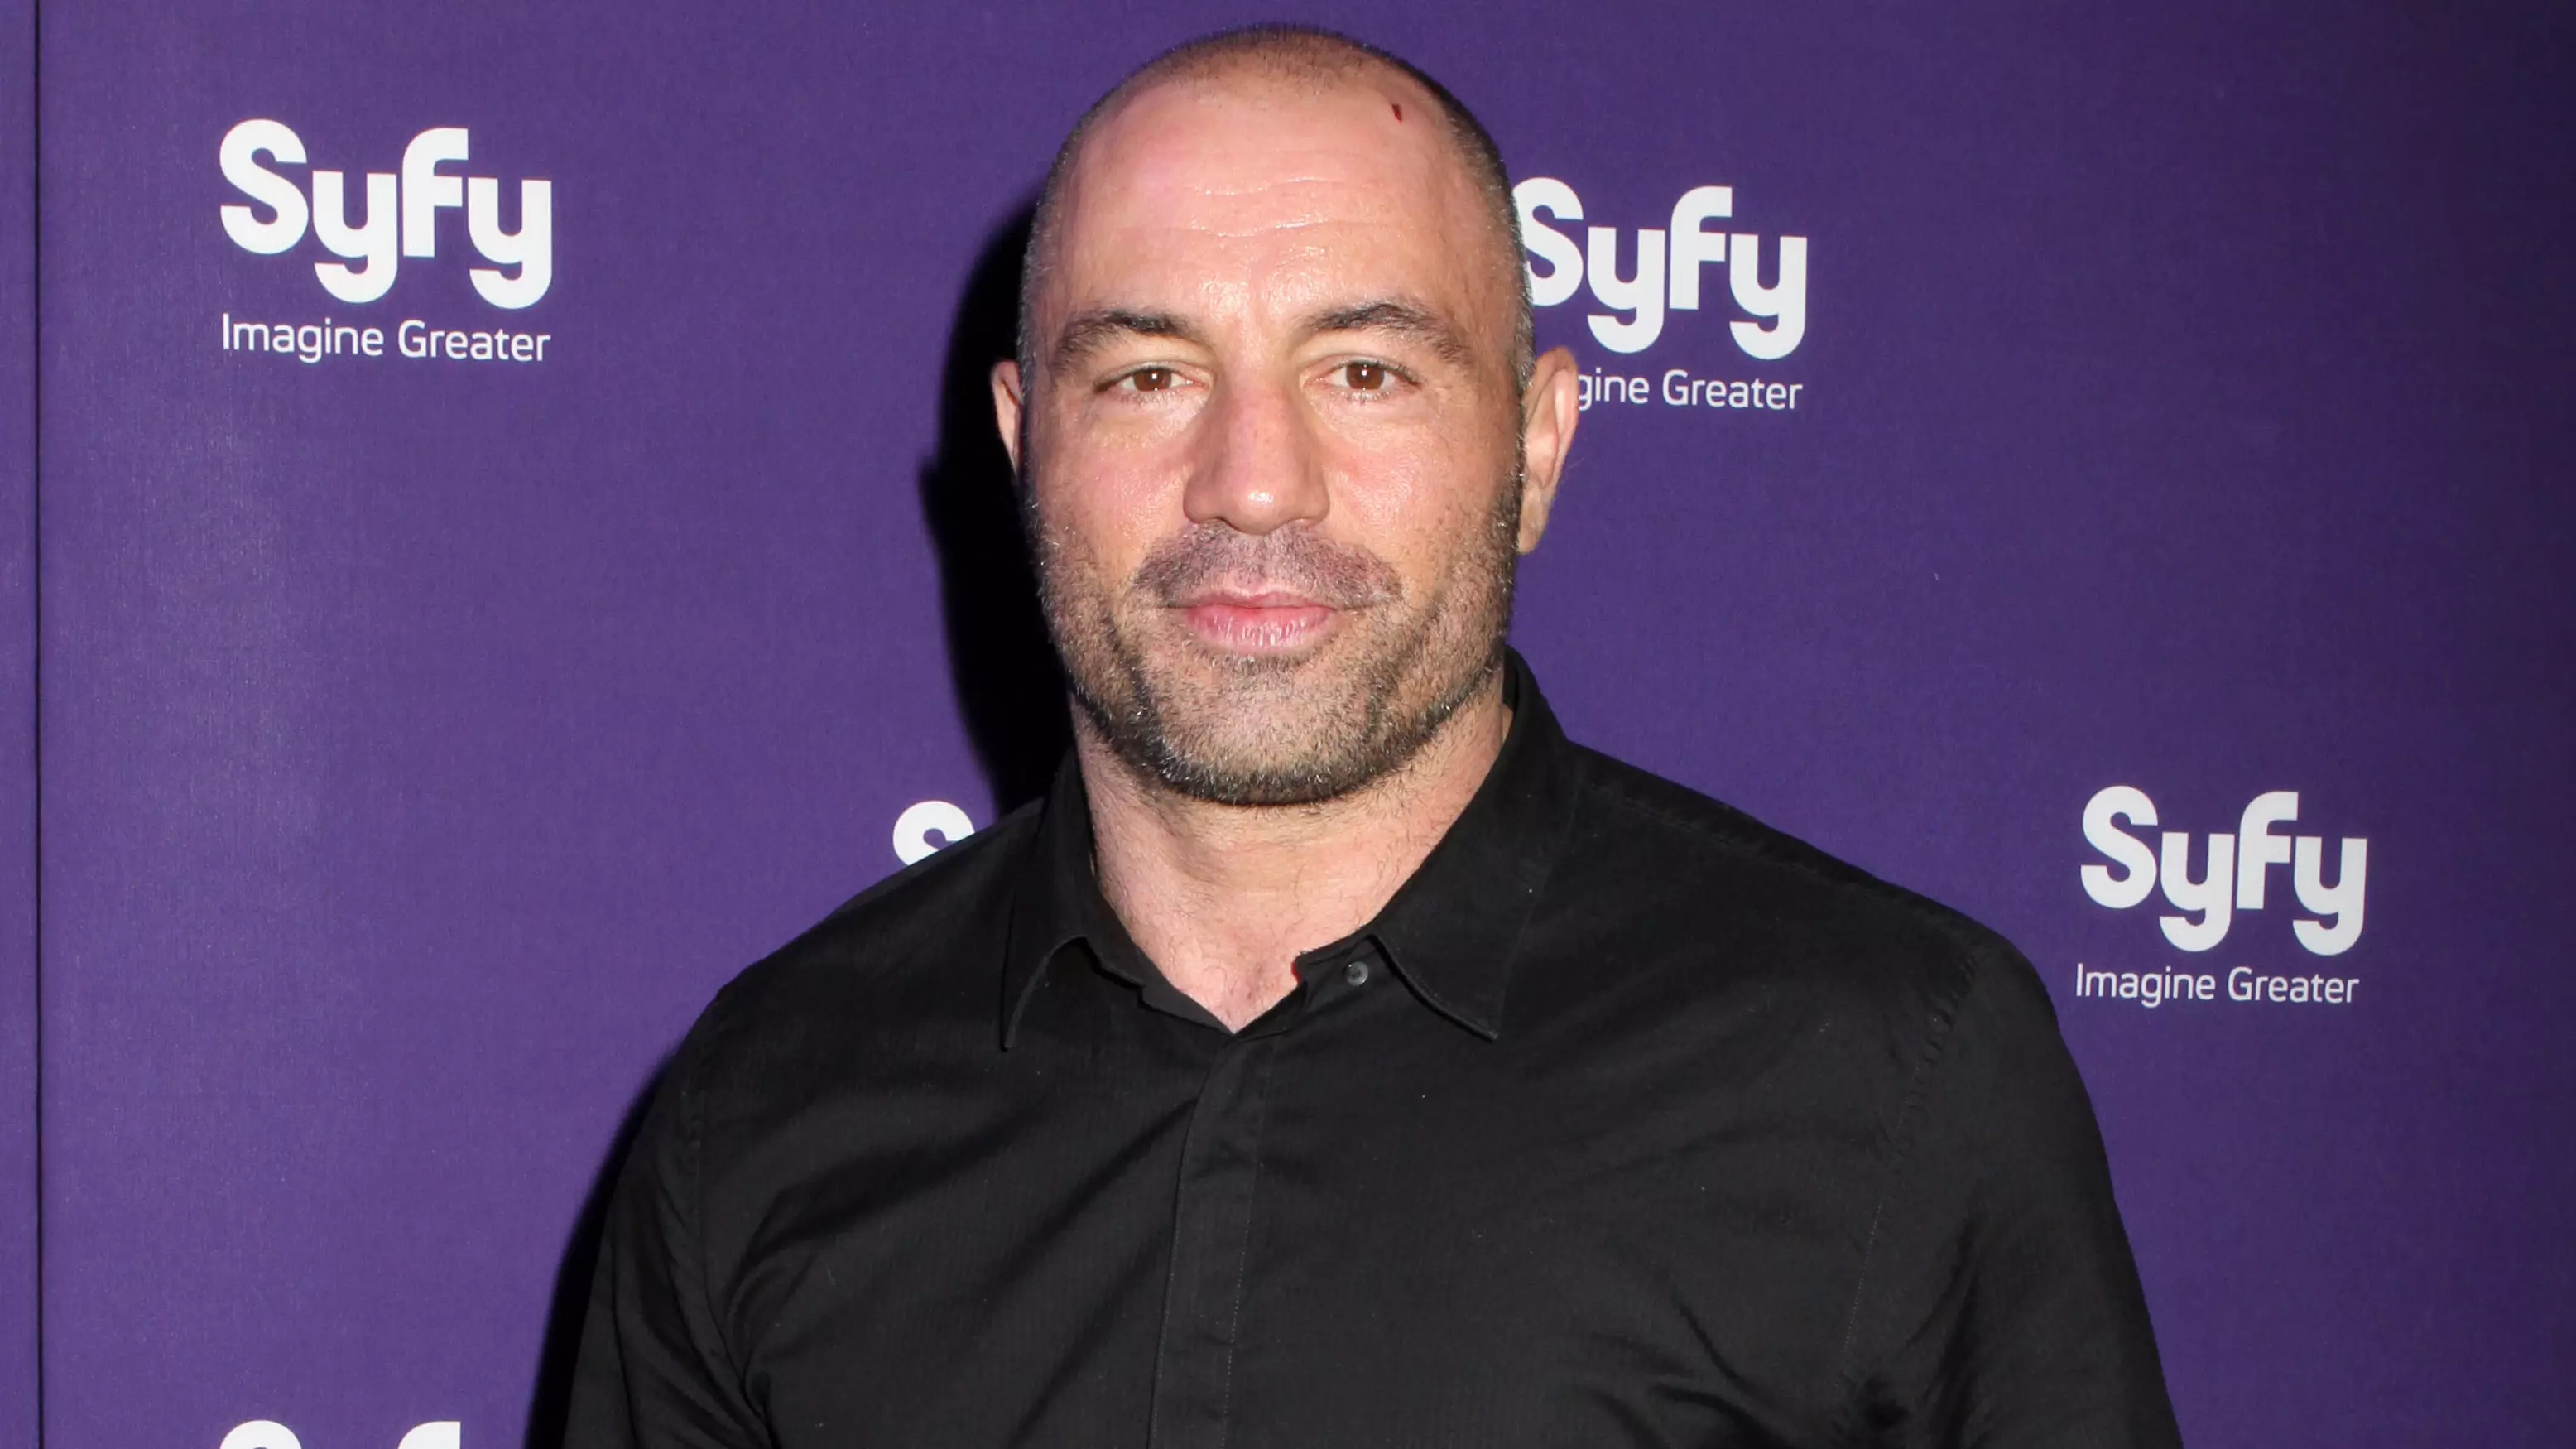 Petition Set Up To Get Joe Rogan To Moderate The 2020 Presidential Debate